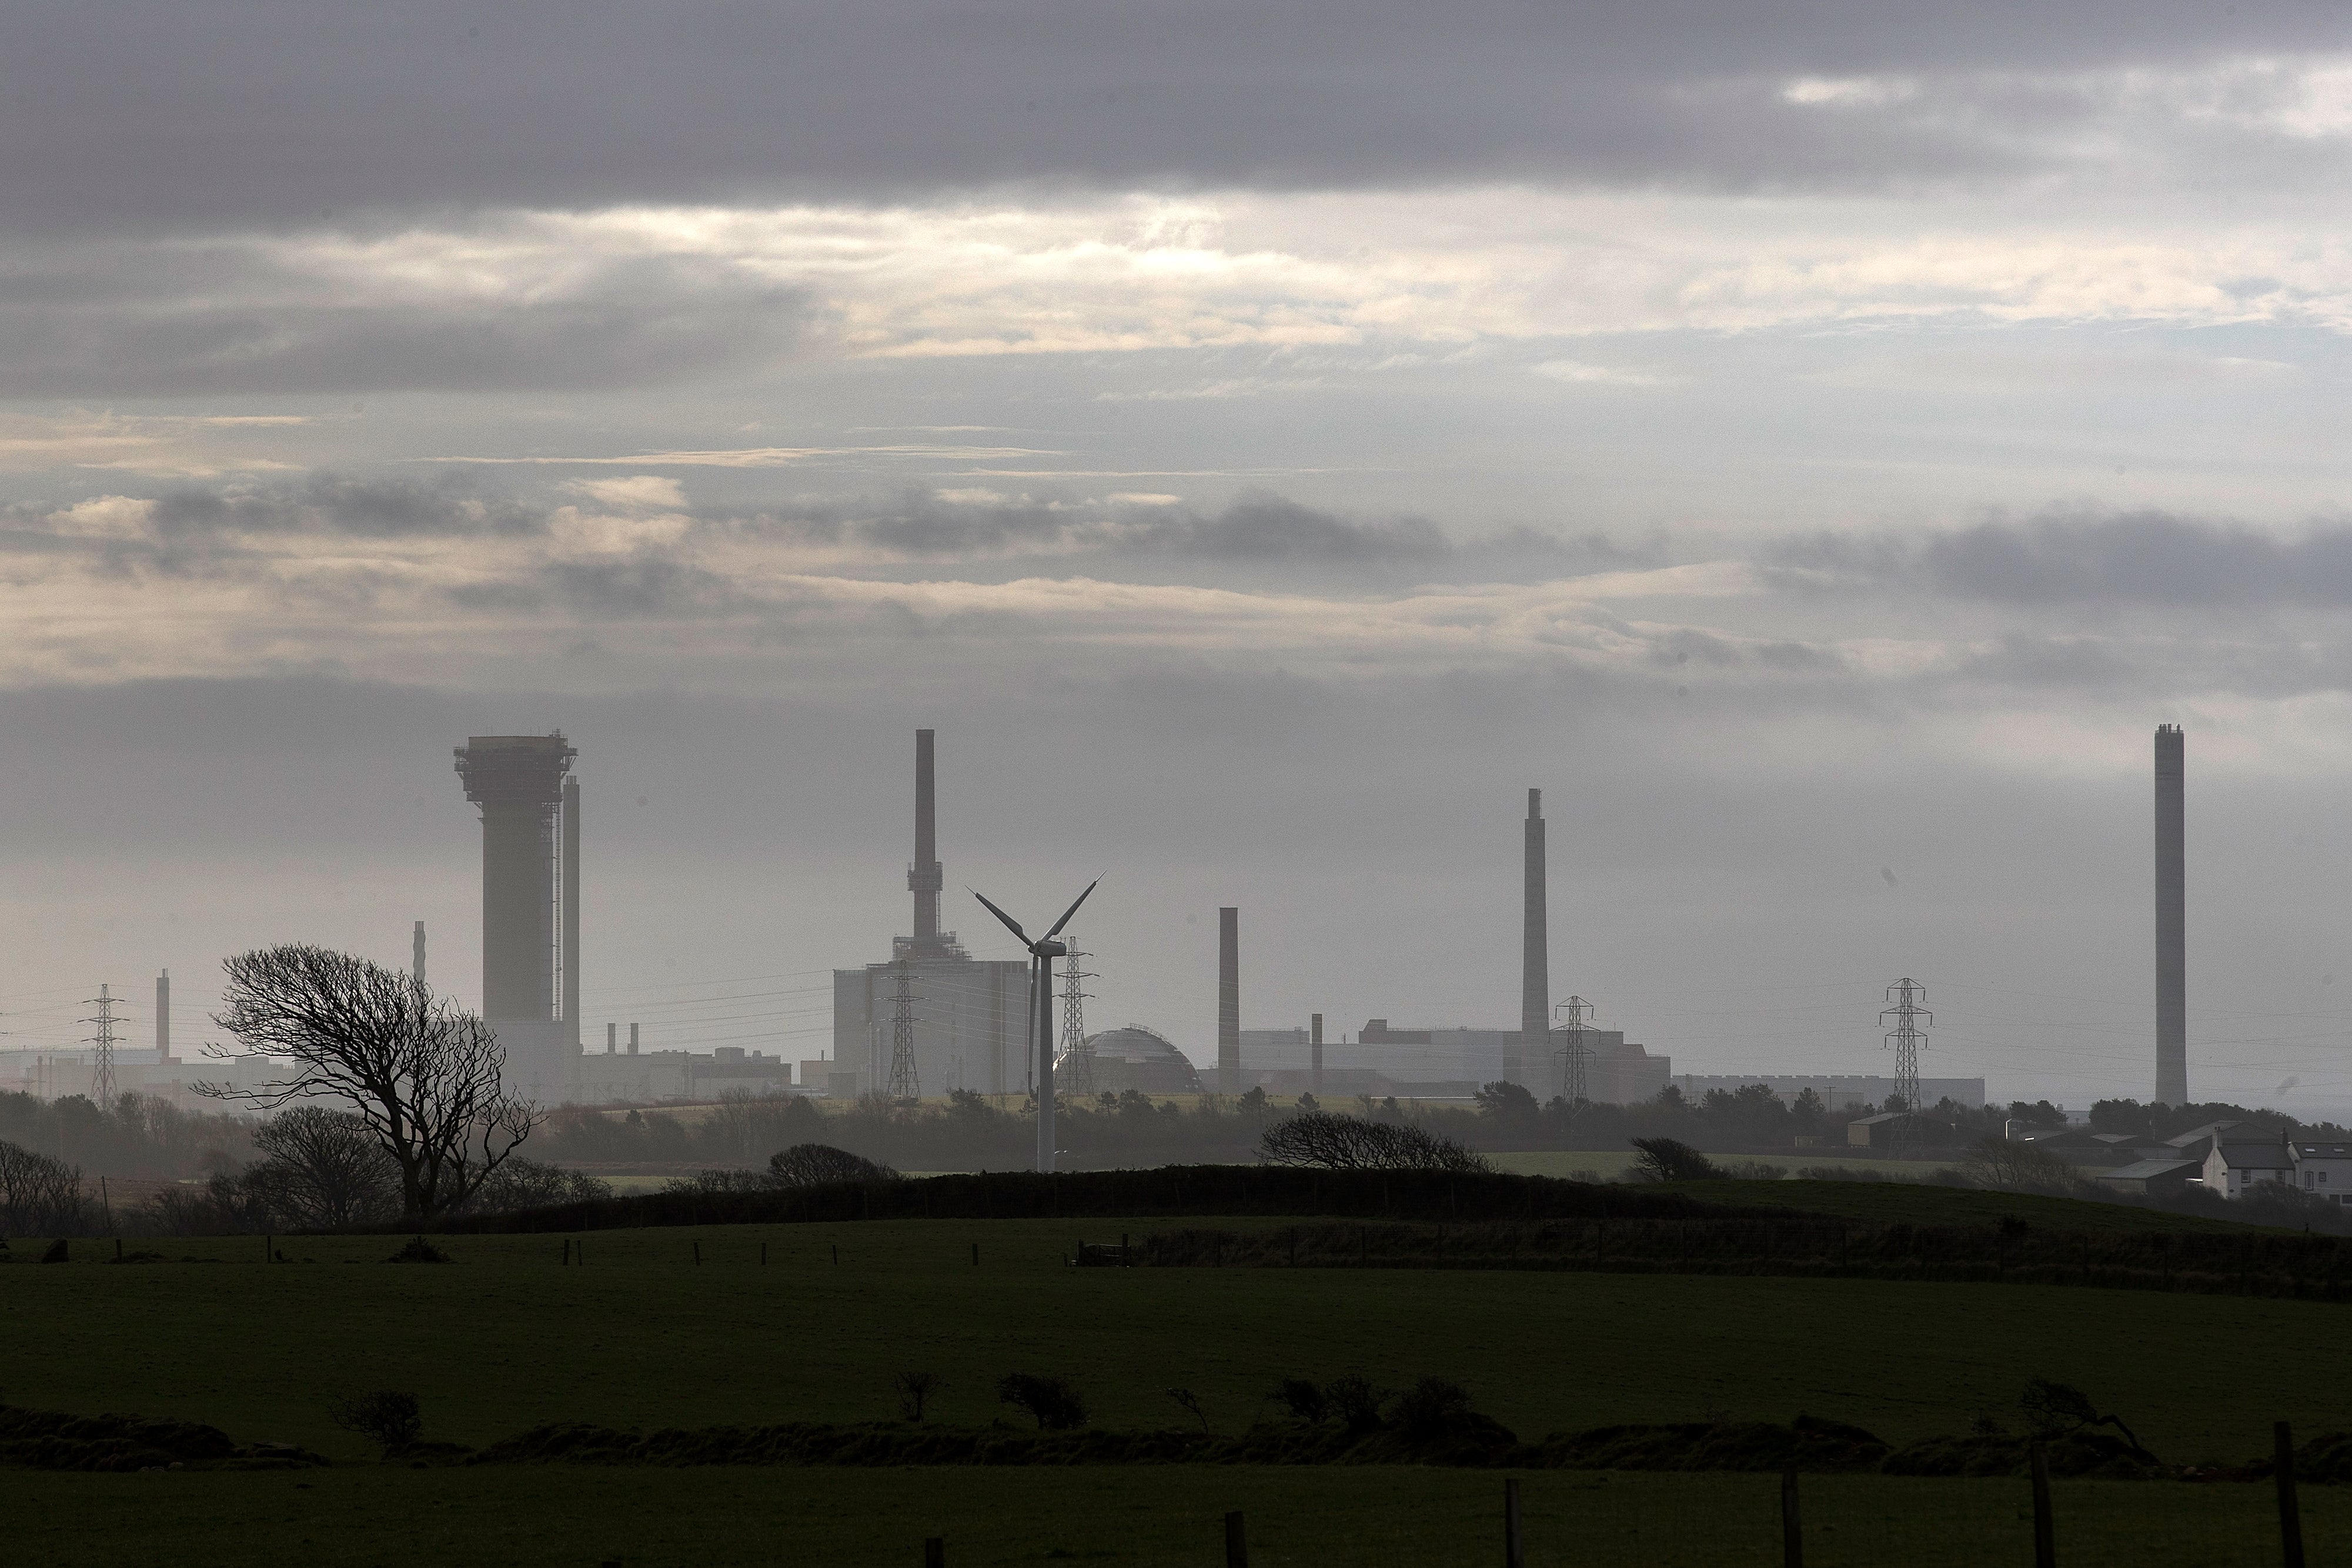 A view of Sellafield Nuclear Power Station in Whitehaven, Cumbria